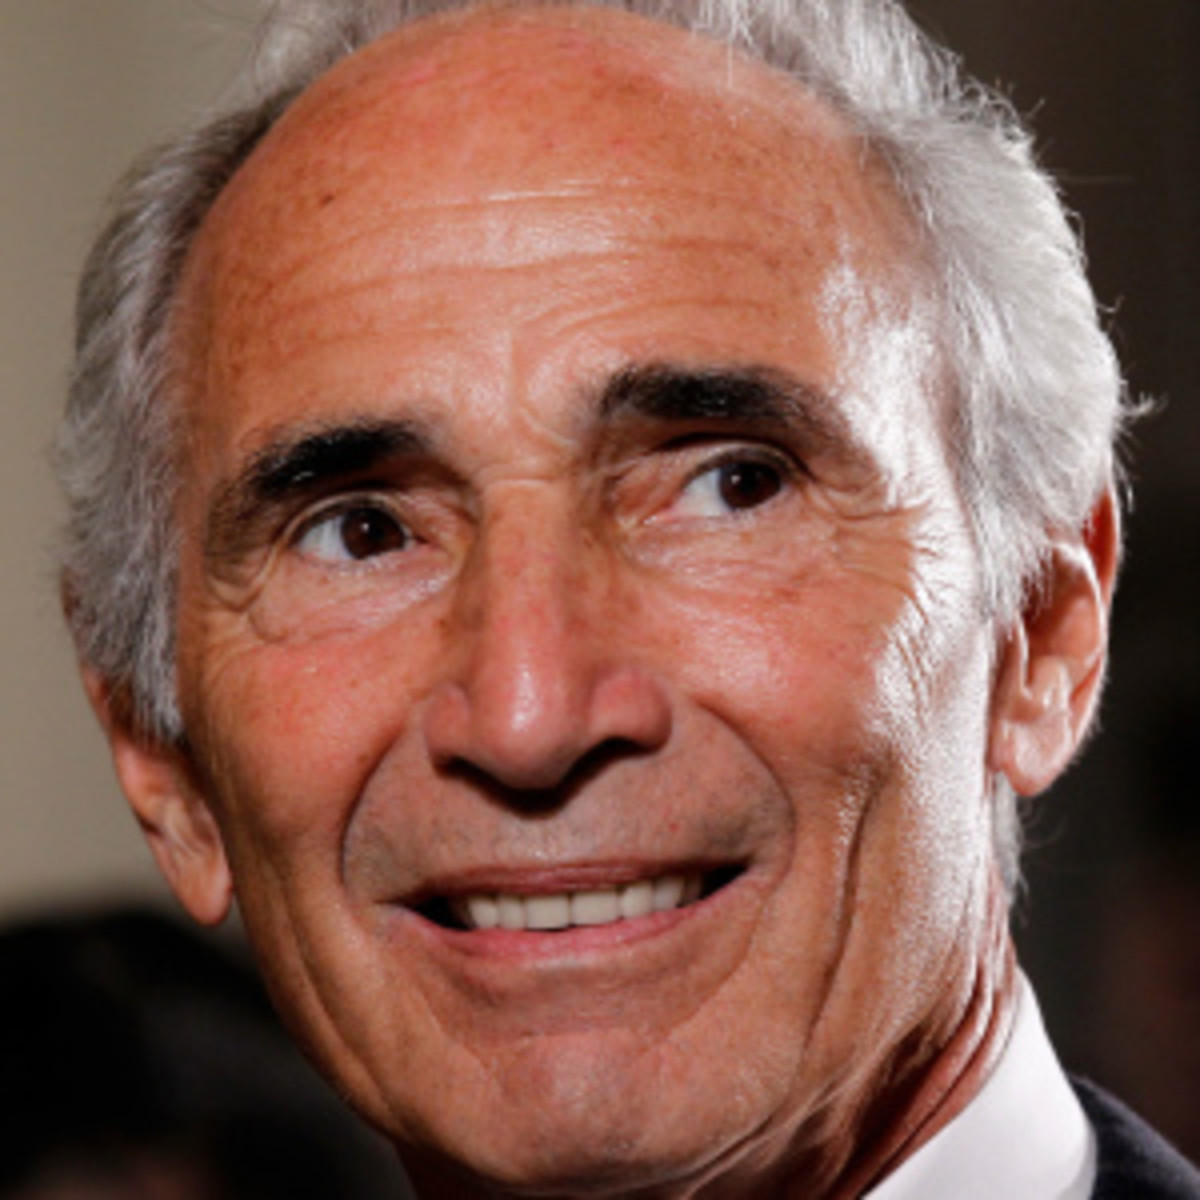 Sandy Koufax rejoins the Dodgers as a special advisor to the Chairman. (Alex Wong/Getty Images)